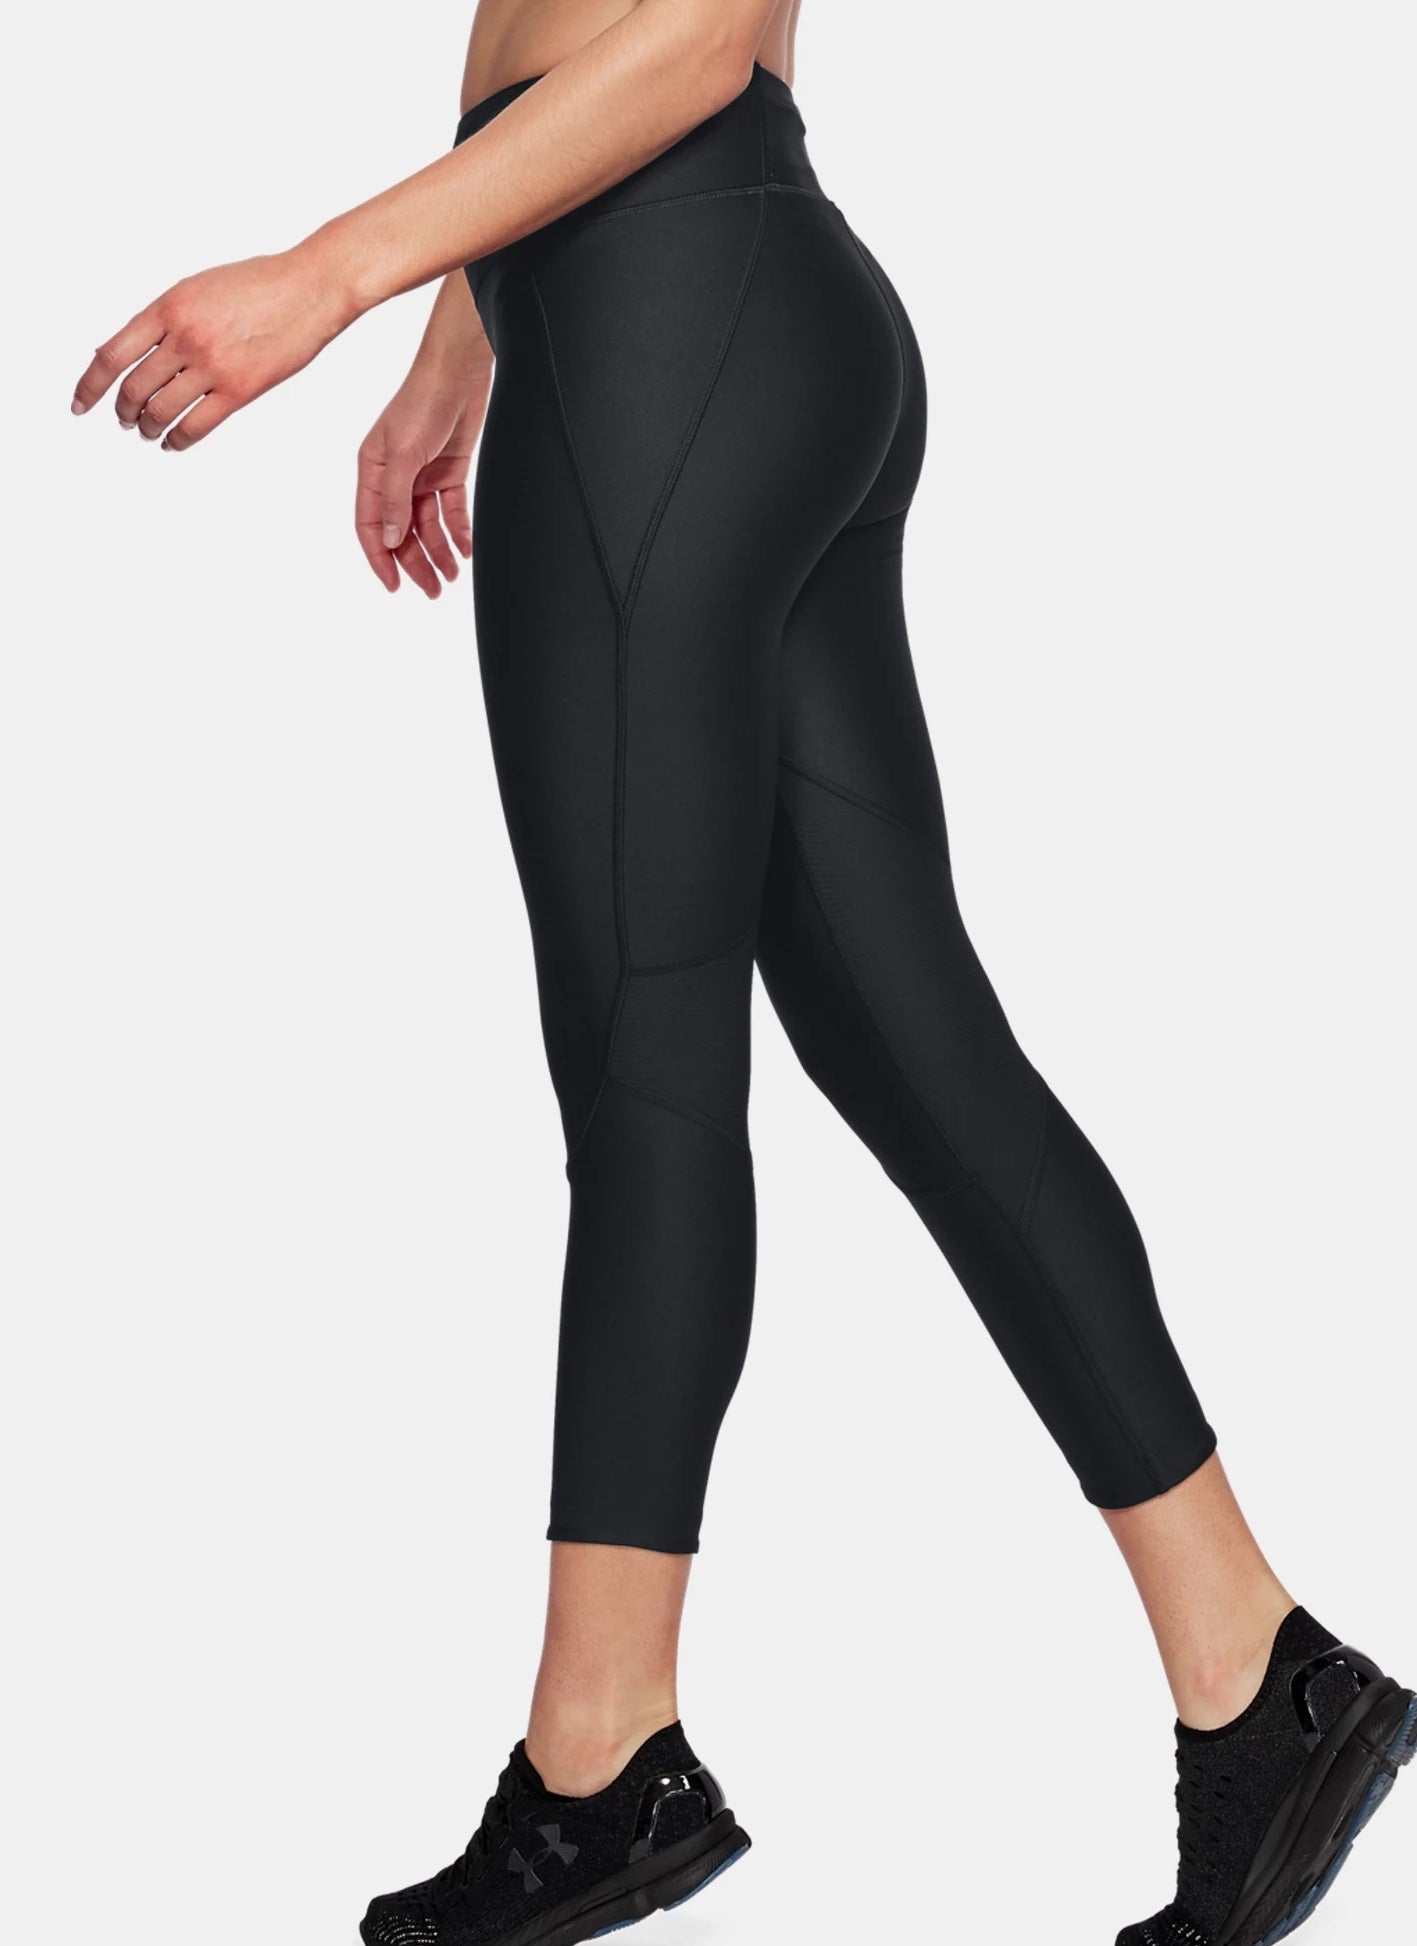 Under Armour Women's Armour Fly Fast Crop Leggings, Flint (033)/Reflective,  X-Small